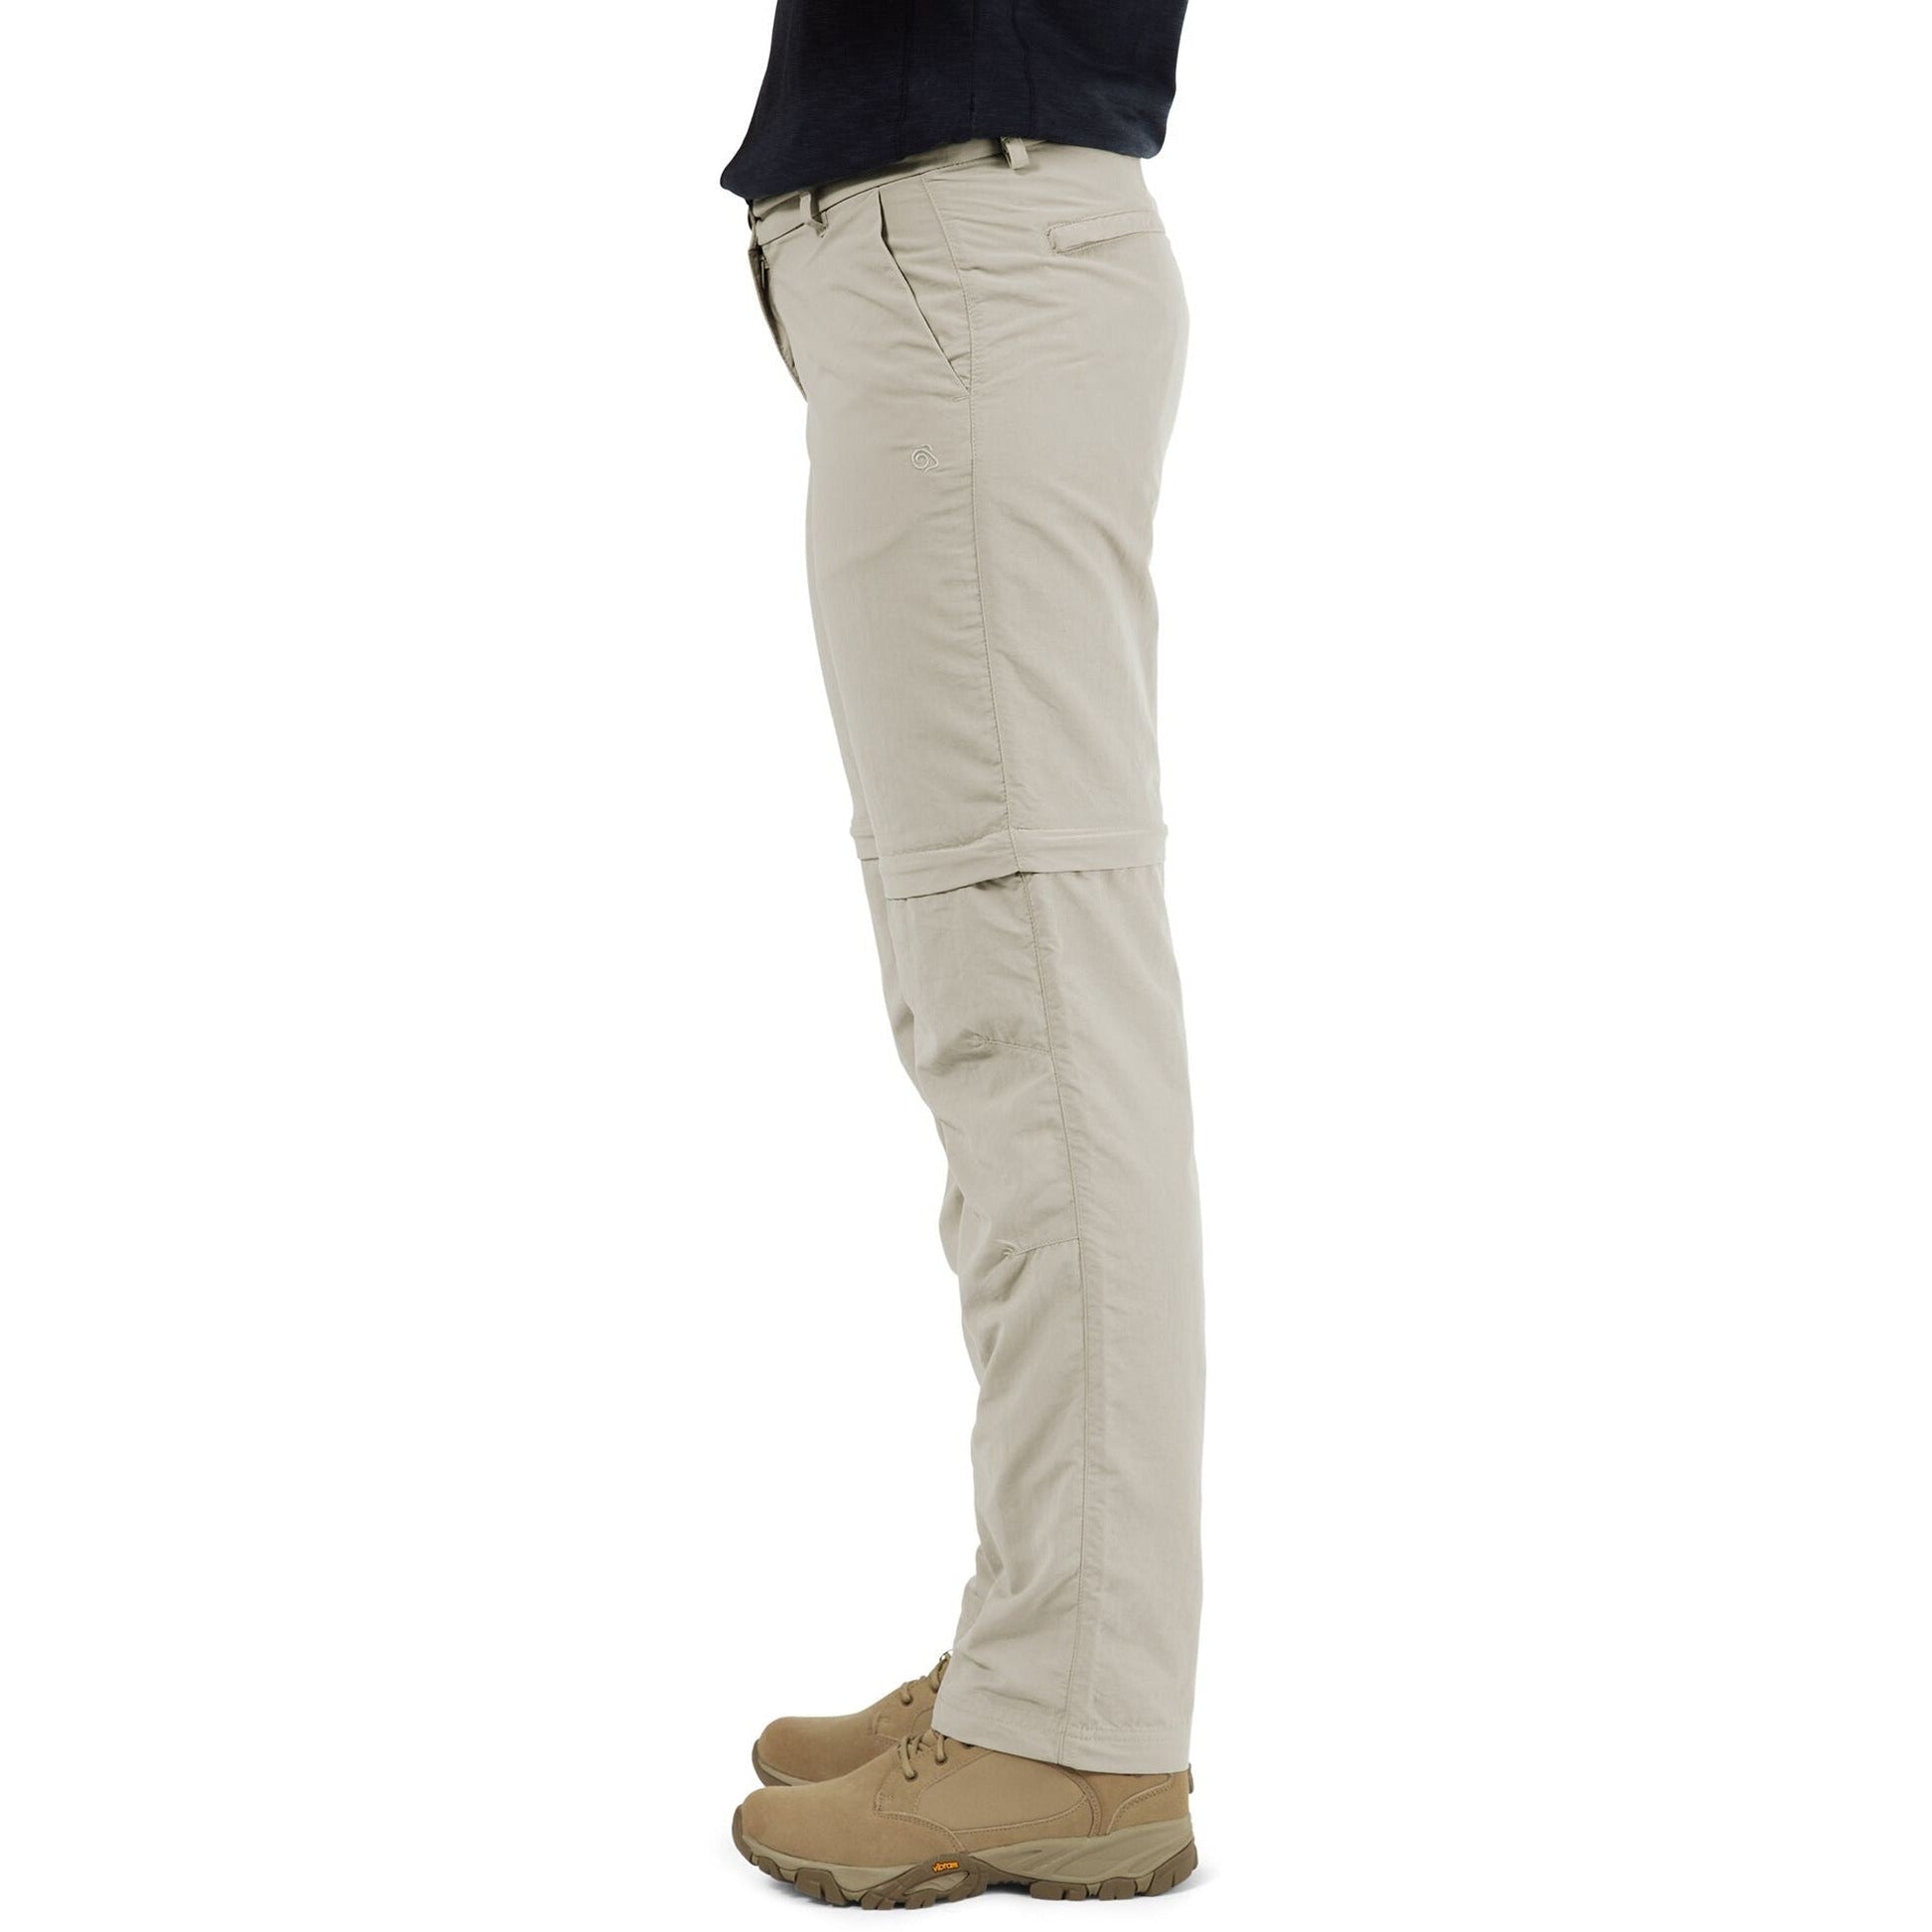 Craghoppers Nosilife Convertible Iii Trousers Cwj1214 Side - Side View